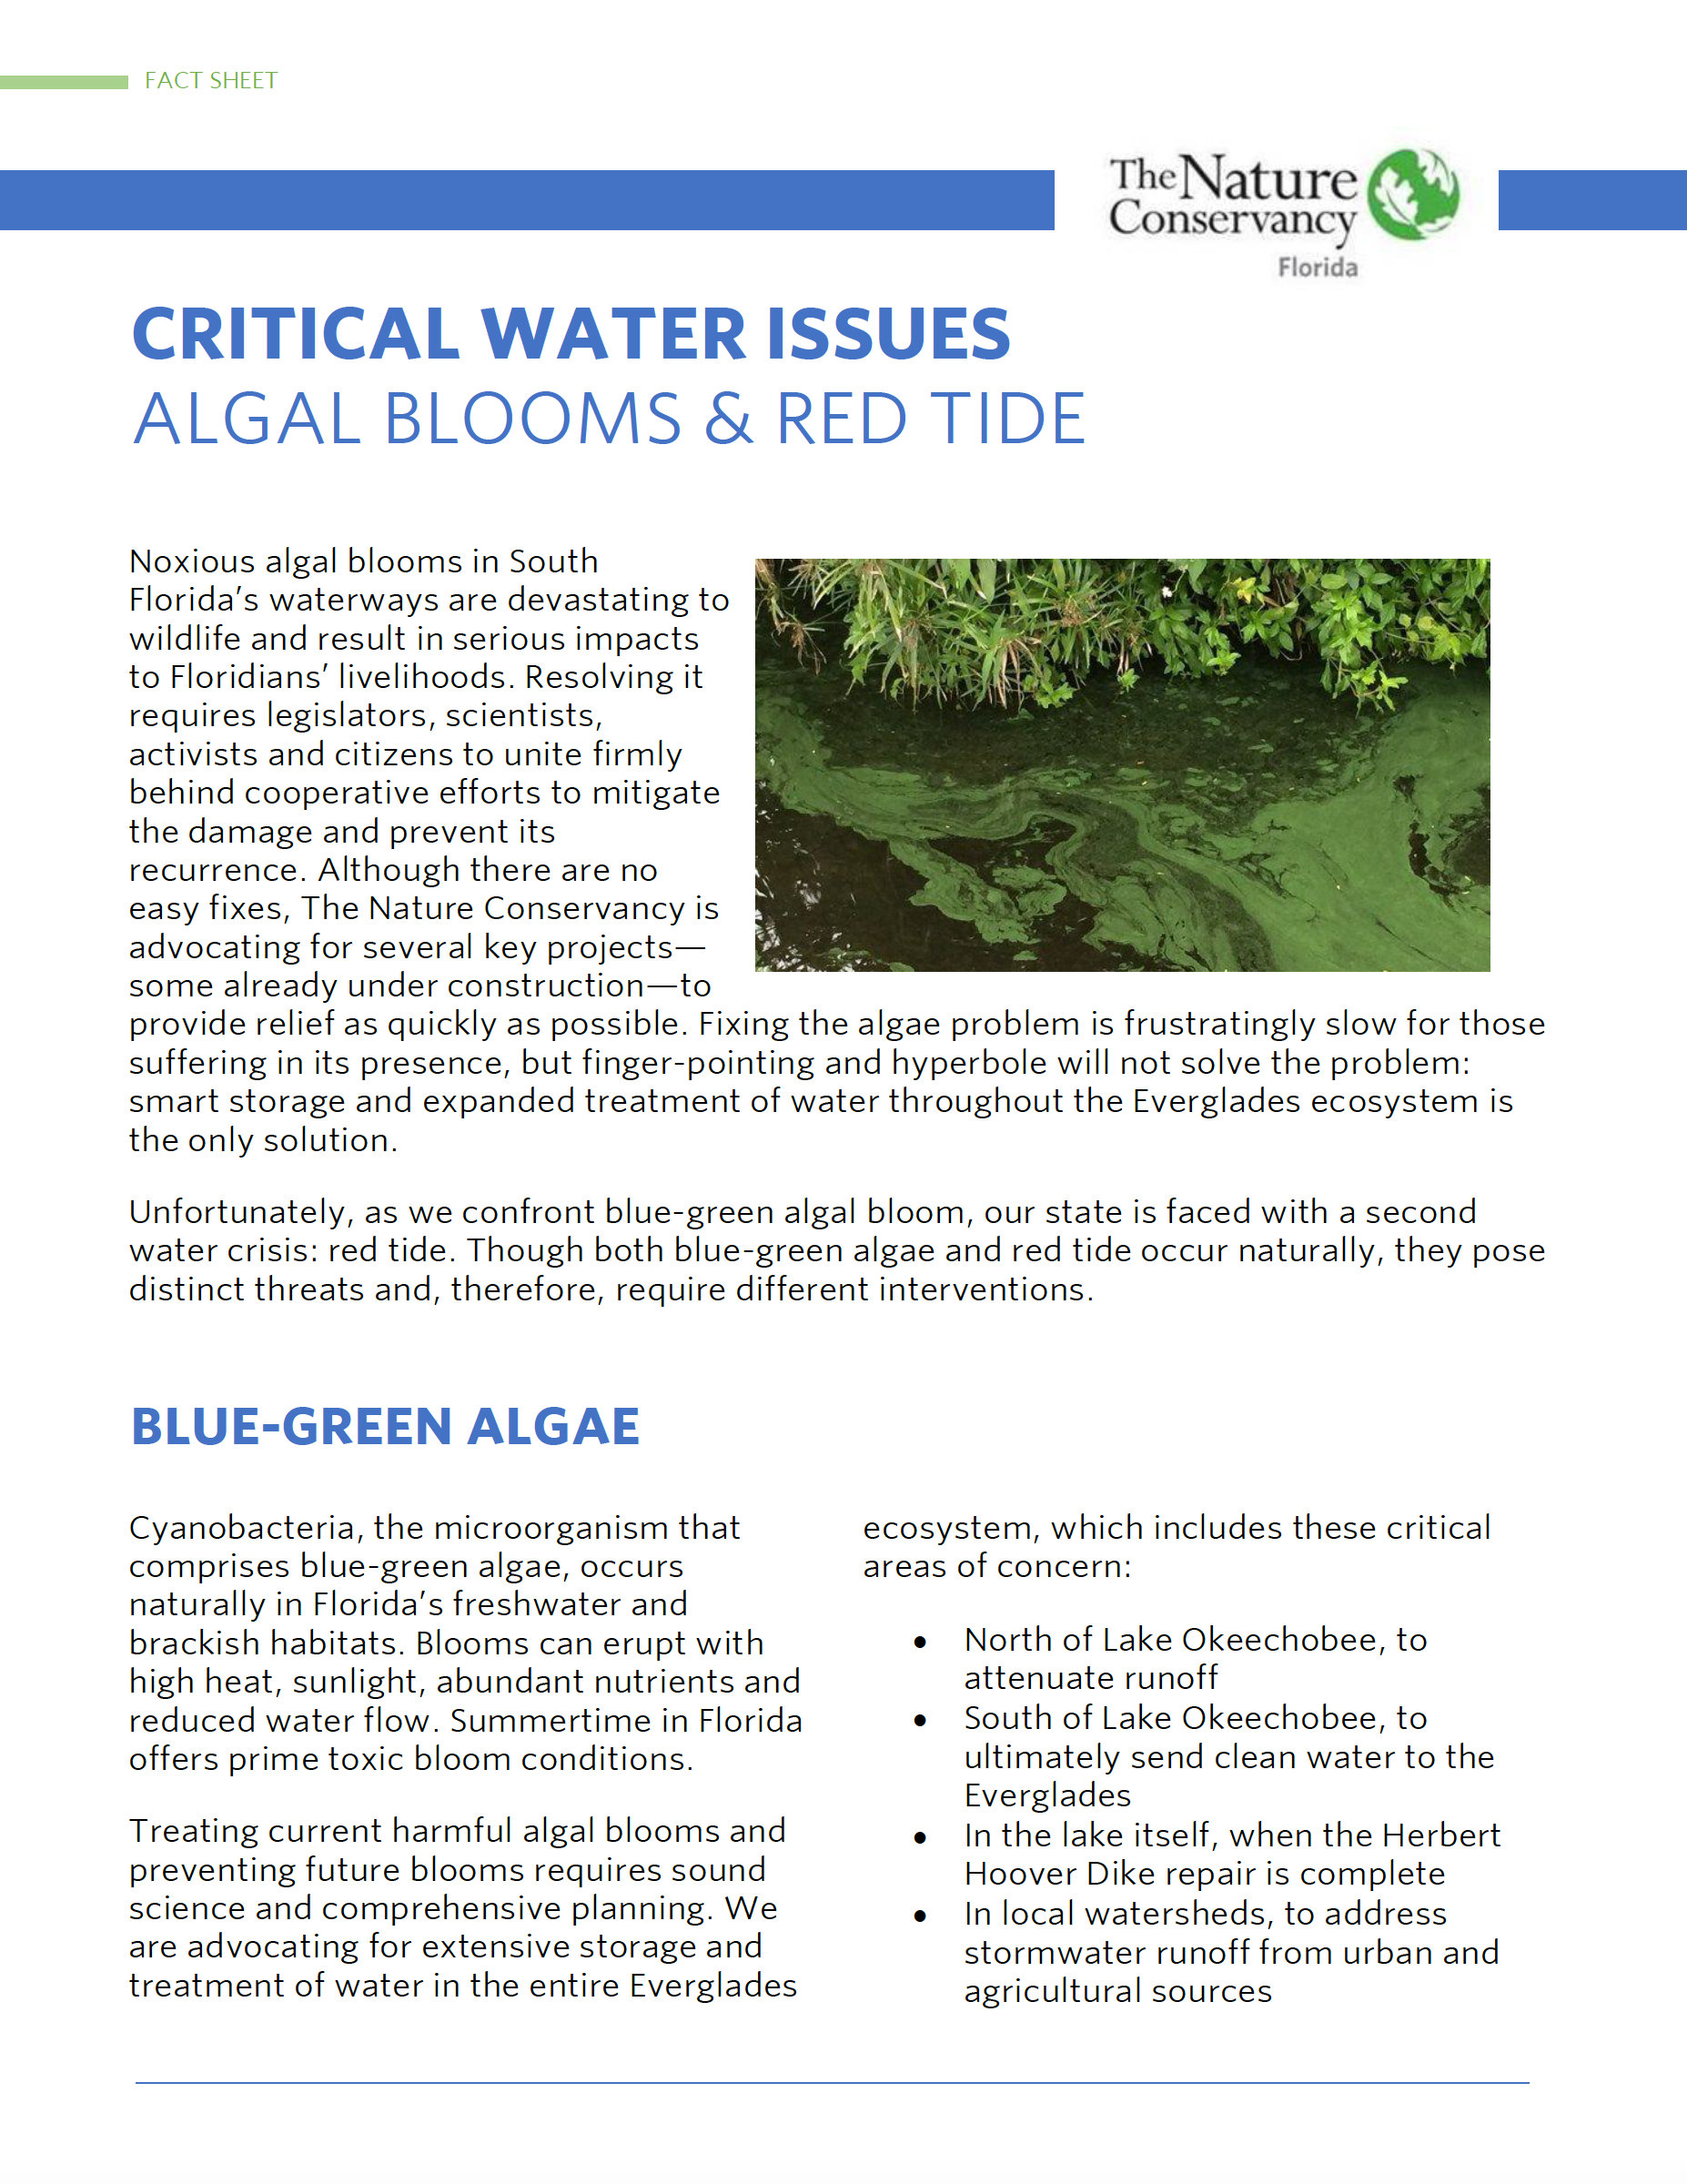 Algal Blooms and Red Tide Fact Sheet